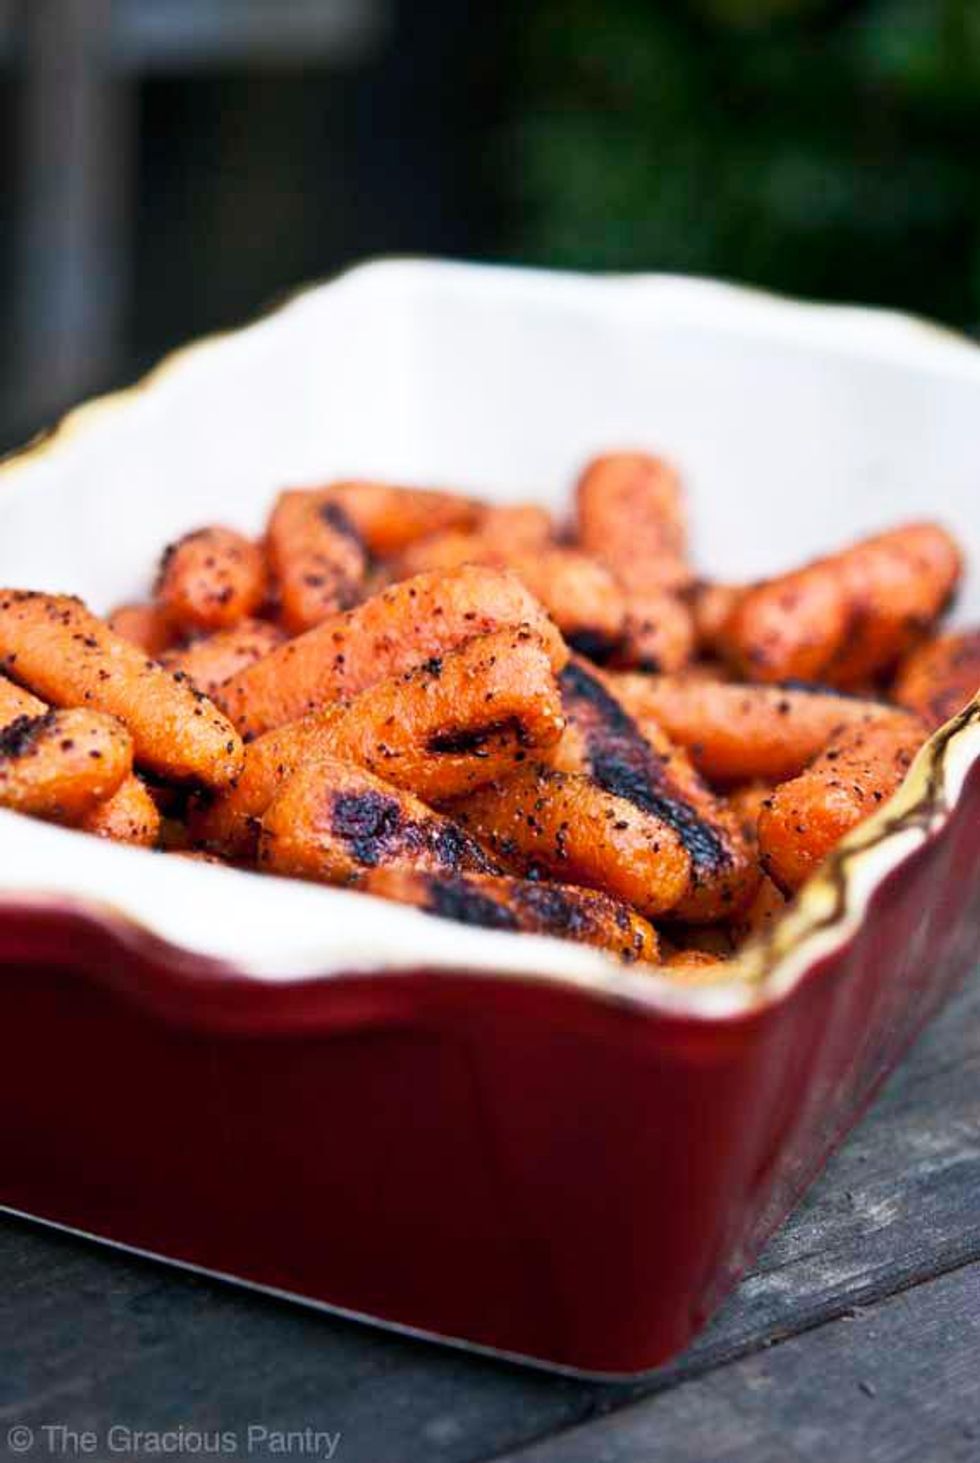 BBQ Carrots is one of 15 of our creative bbq food ideas